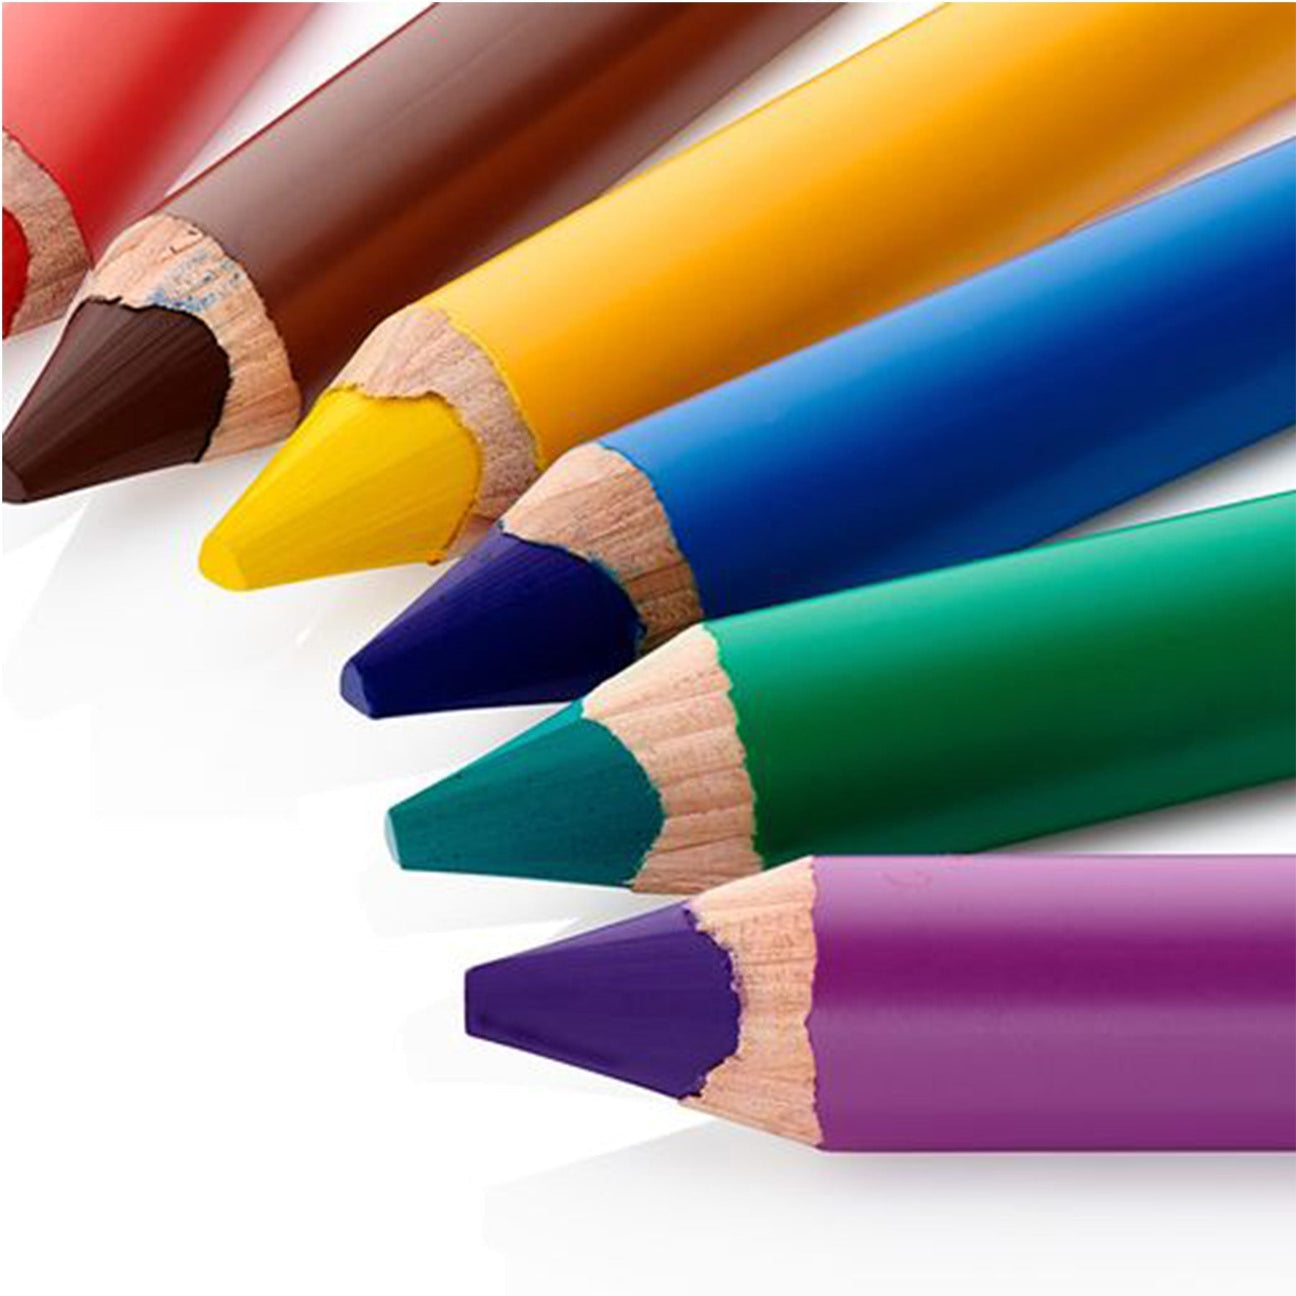 Buy Drawing & Colouring Sets Online in the UK at the best prices